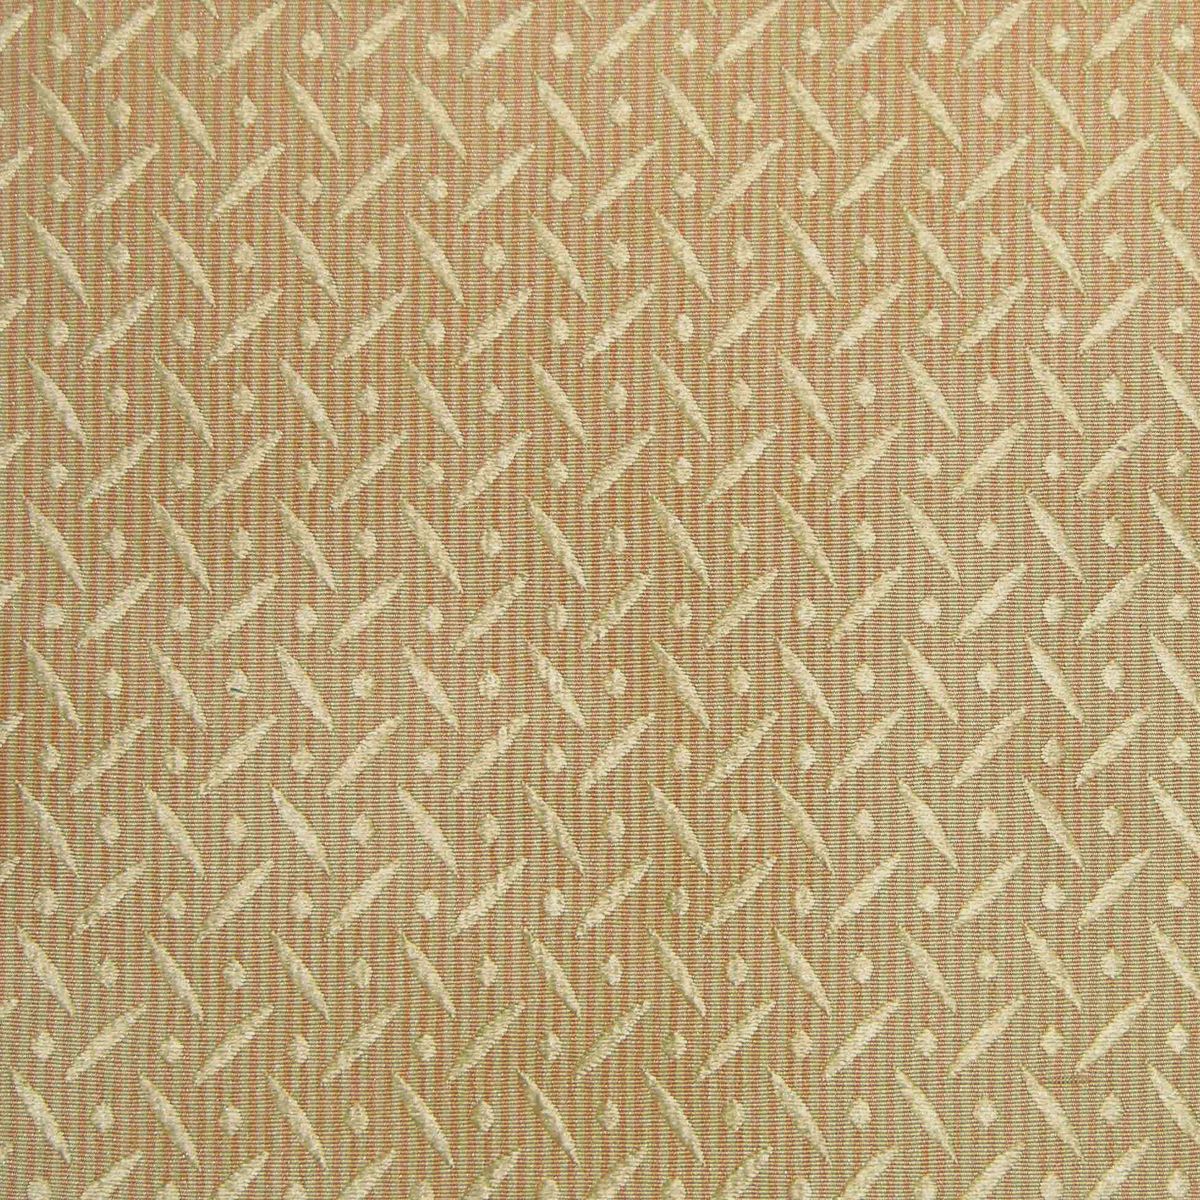 Crosshatch fabric in brown color - pattern number PQ 00041521 - by Scalamandre in the Old World Weavers collection